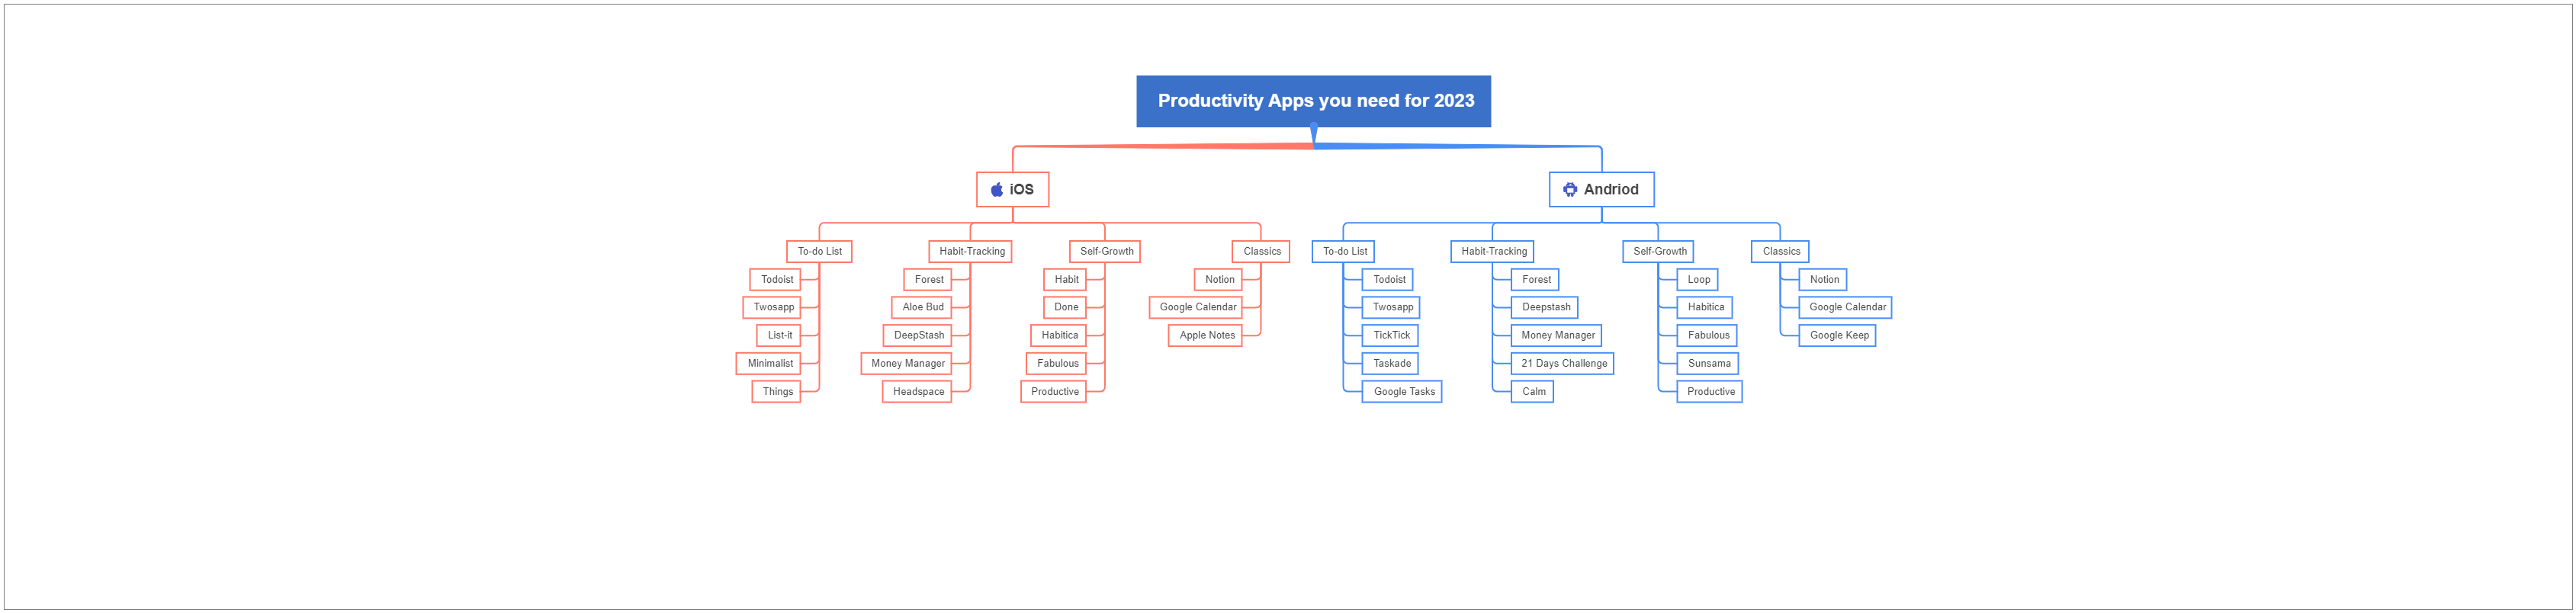 Productivity Apps for 2023